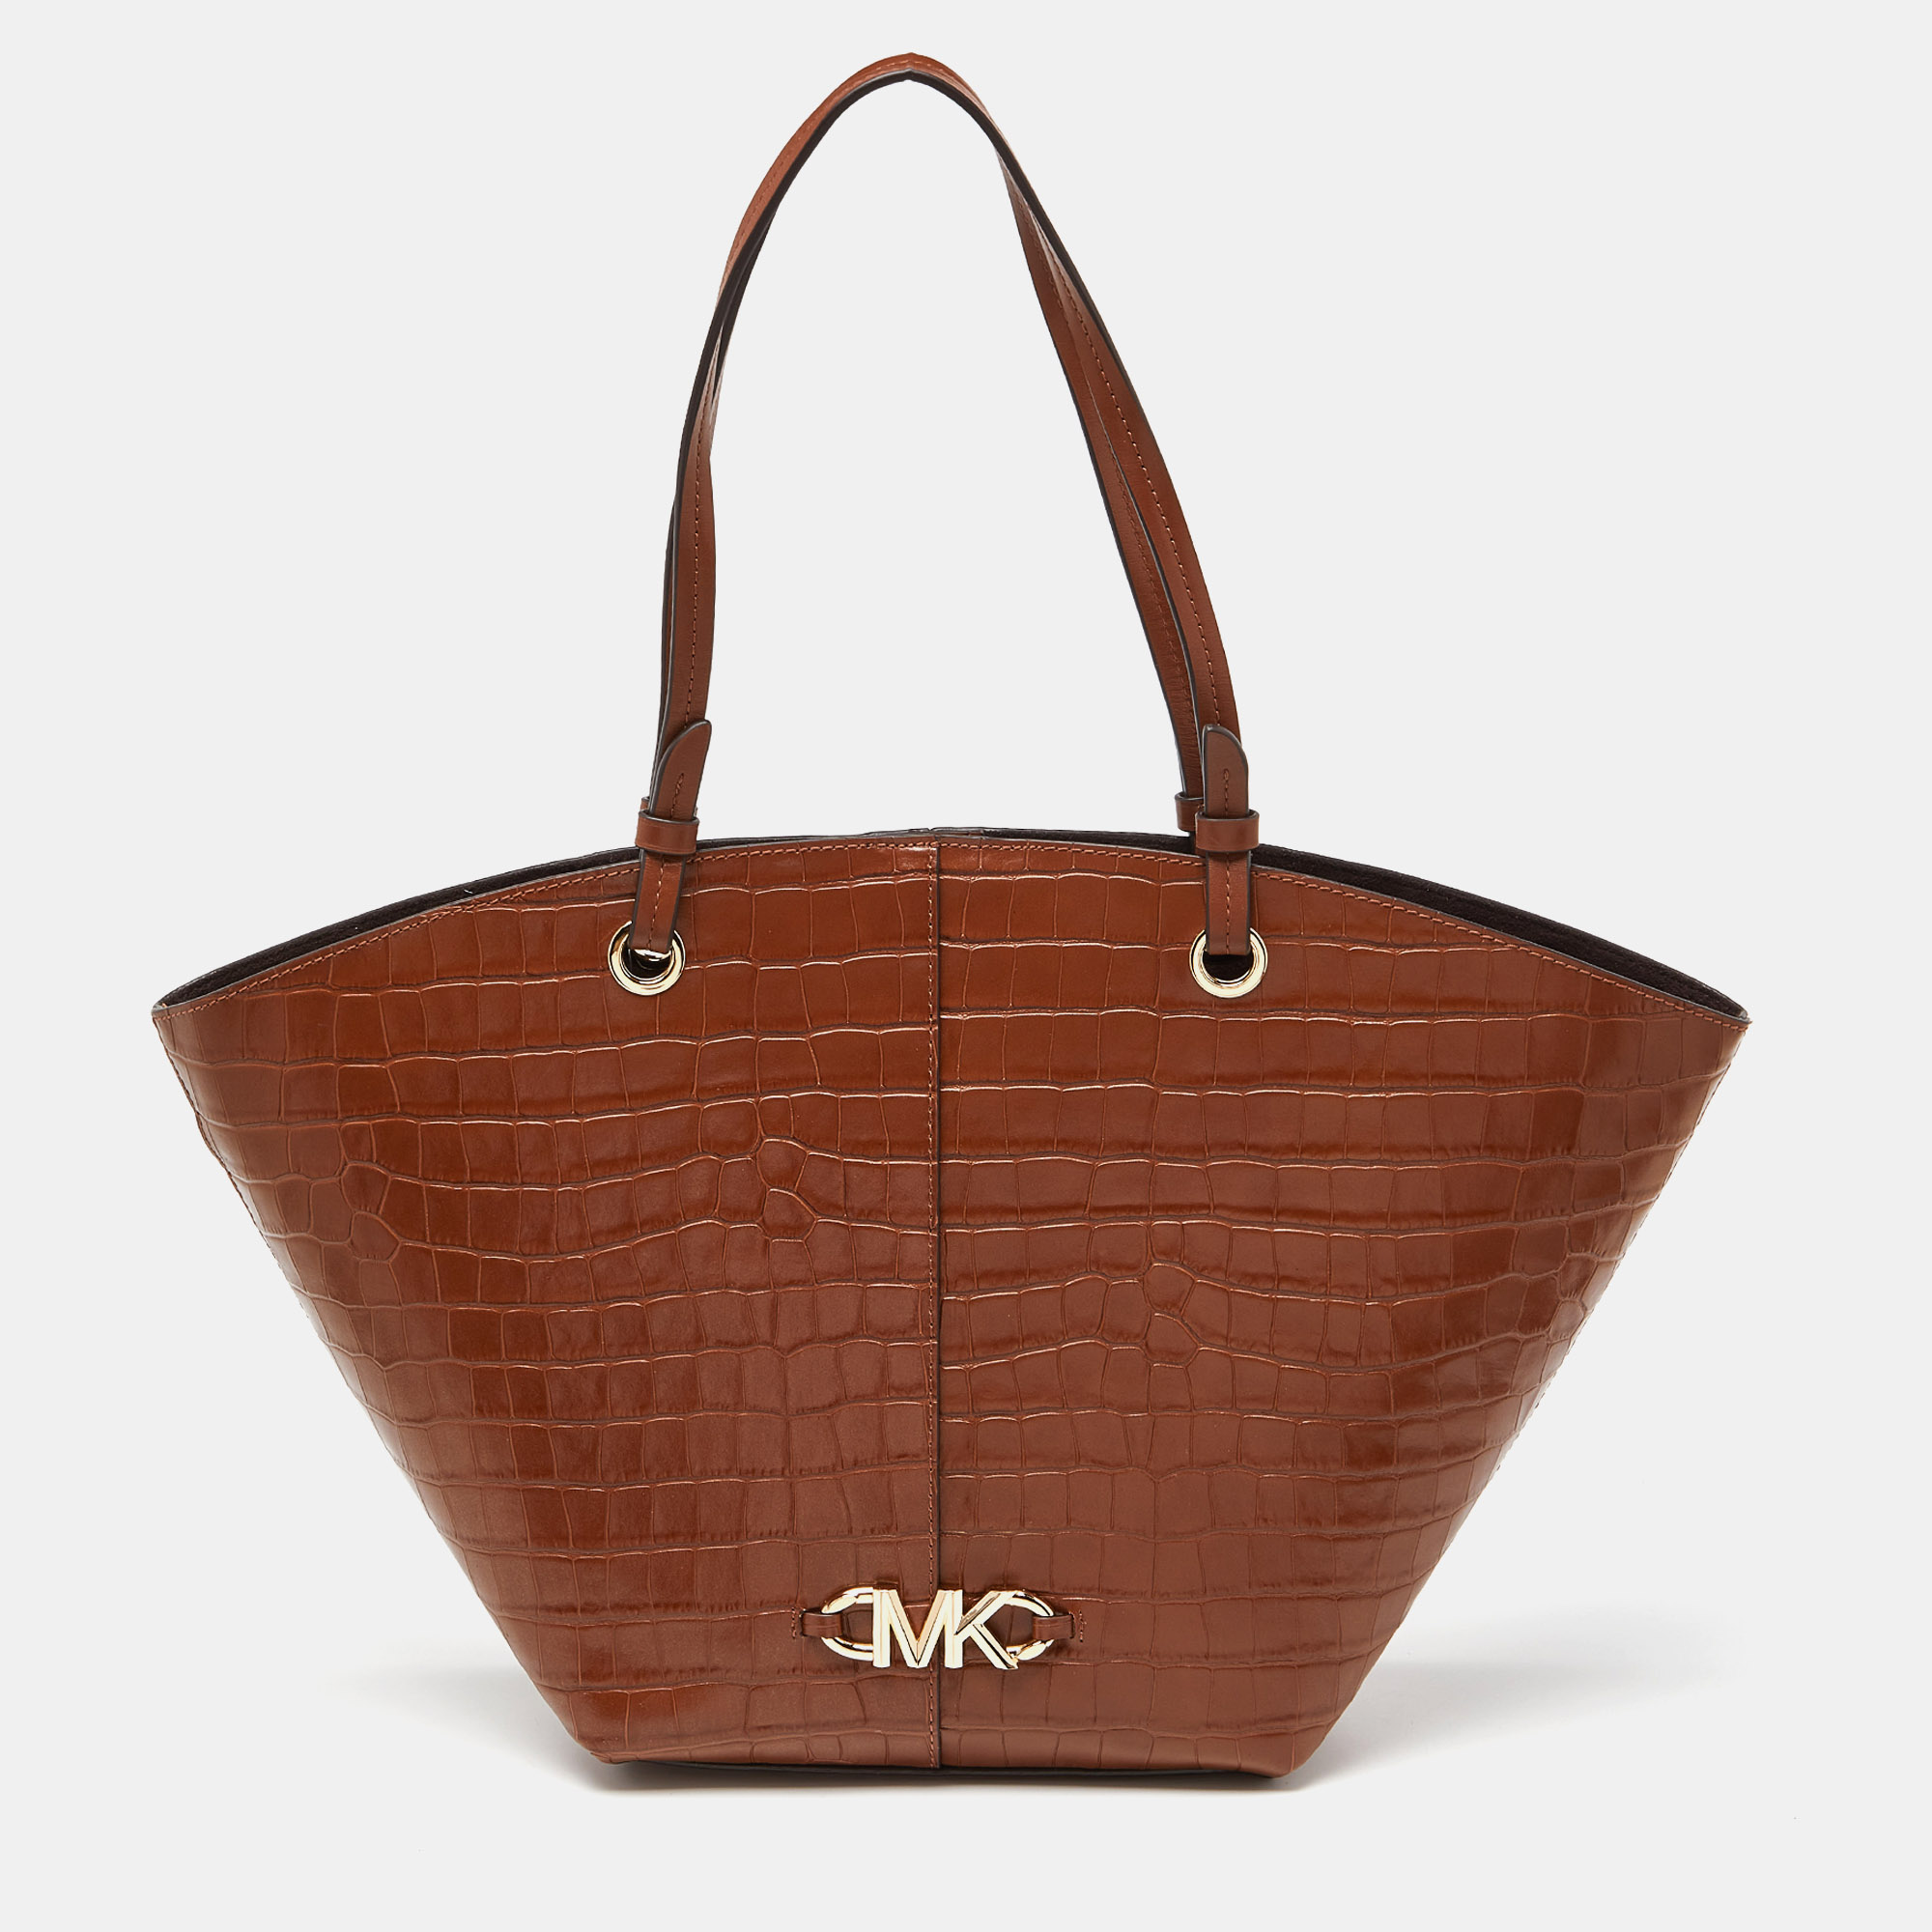 Pre-owned Michael Kors Brown Croc Embossed Leather Izzy Tote